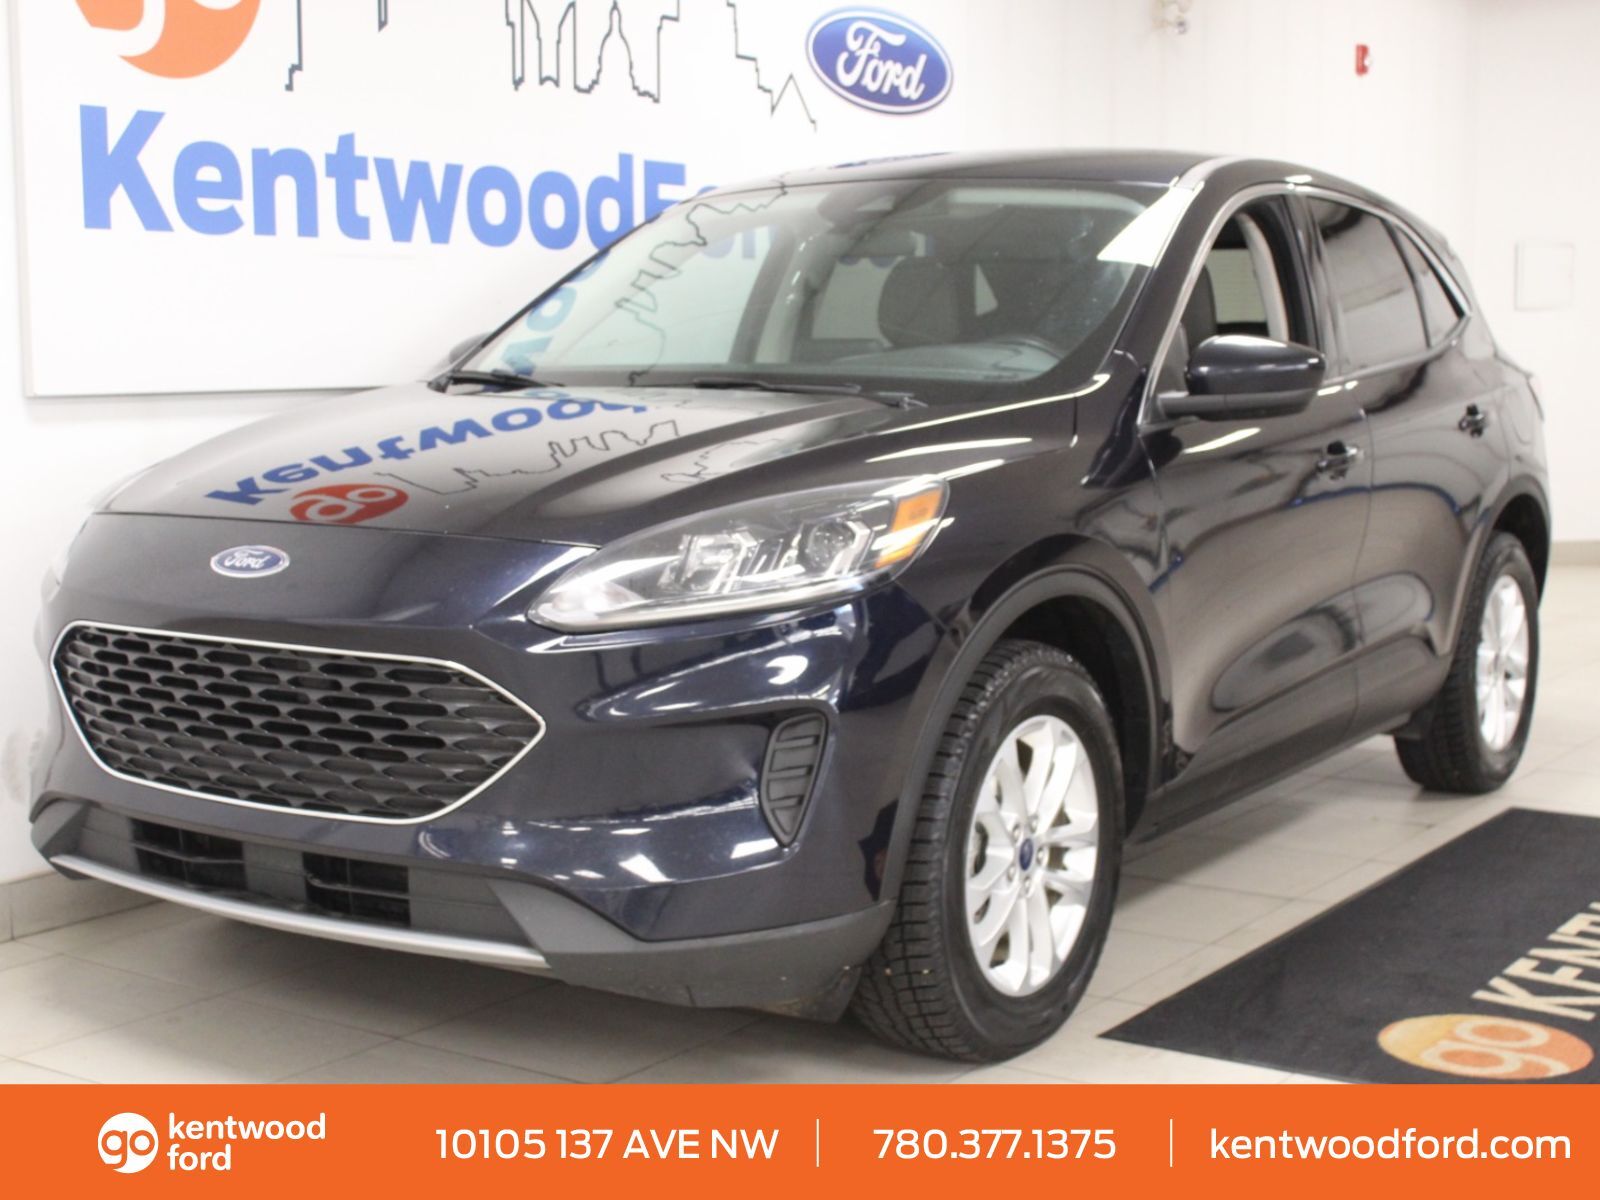 2021 Ford Escape SE | Hybrid | AWD | Remote Starter | Heated Seats/